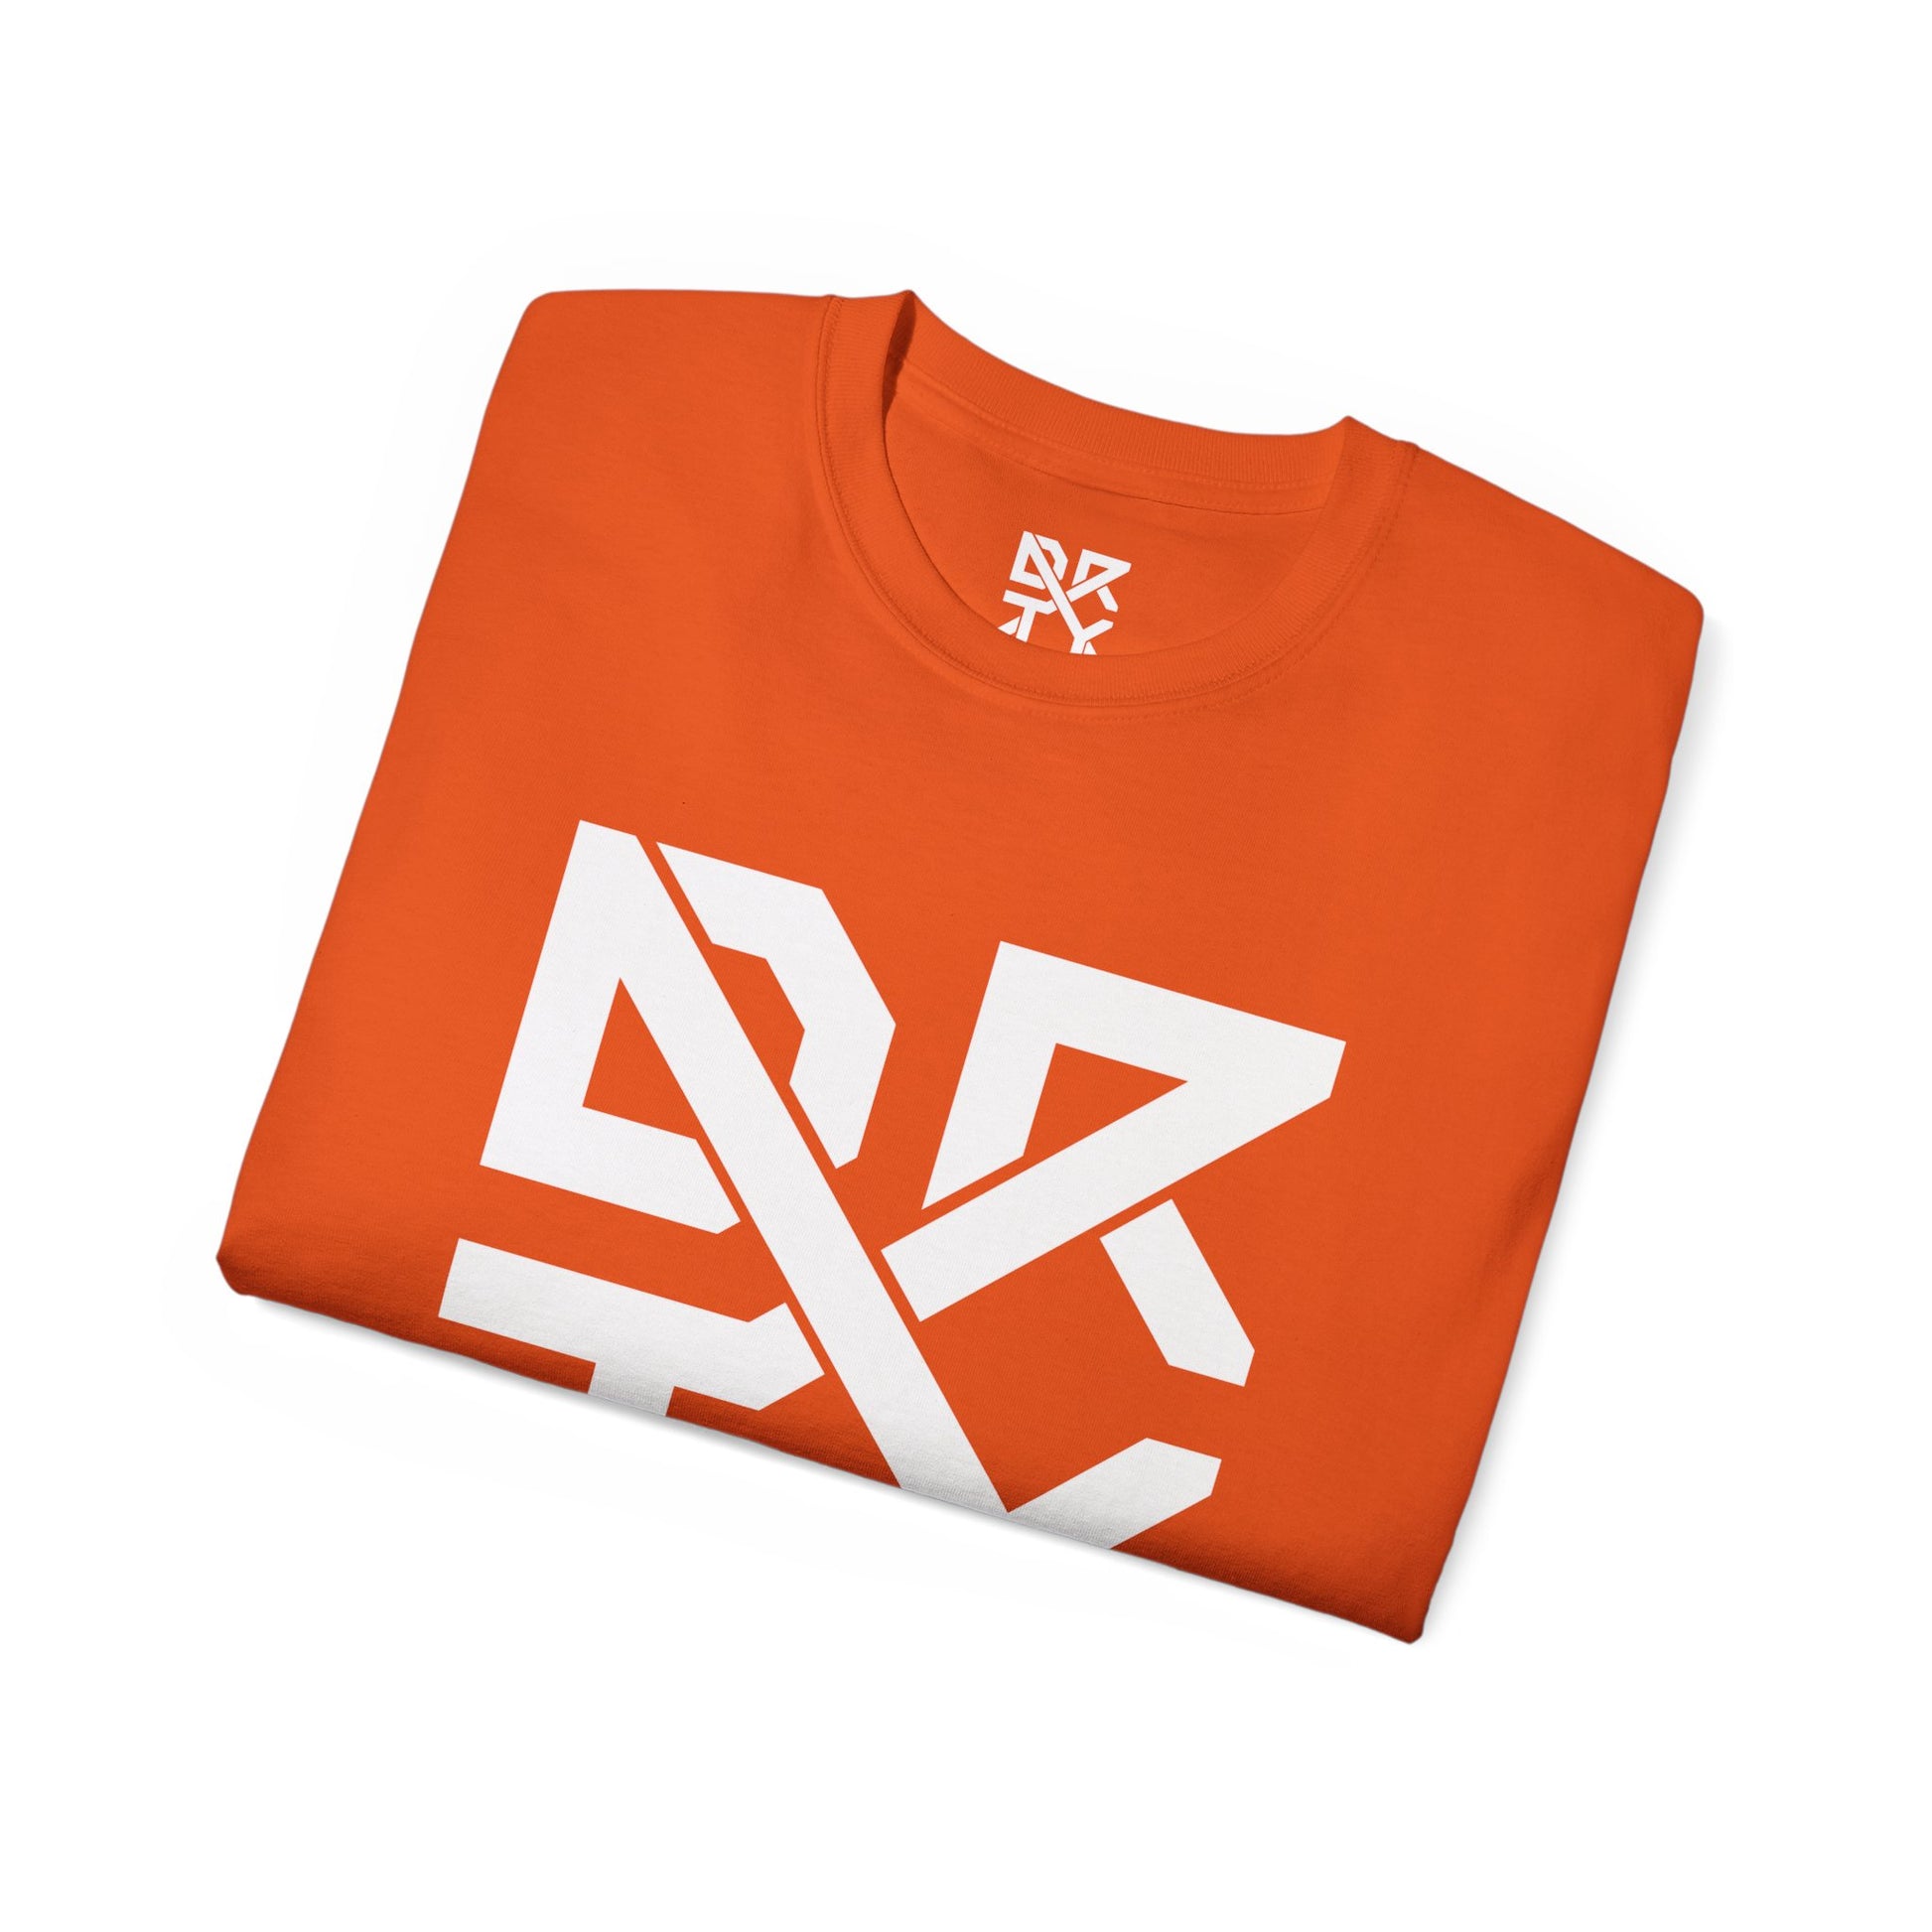 A folded view of the front of the shirt with a cropped DRTY X logo in the collar and front of the shirt.